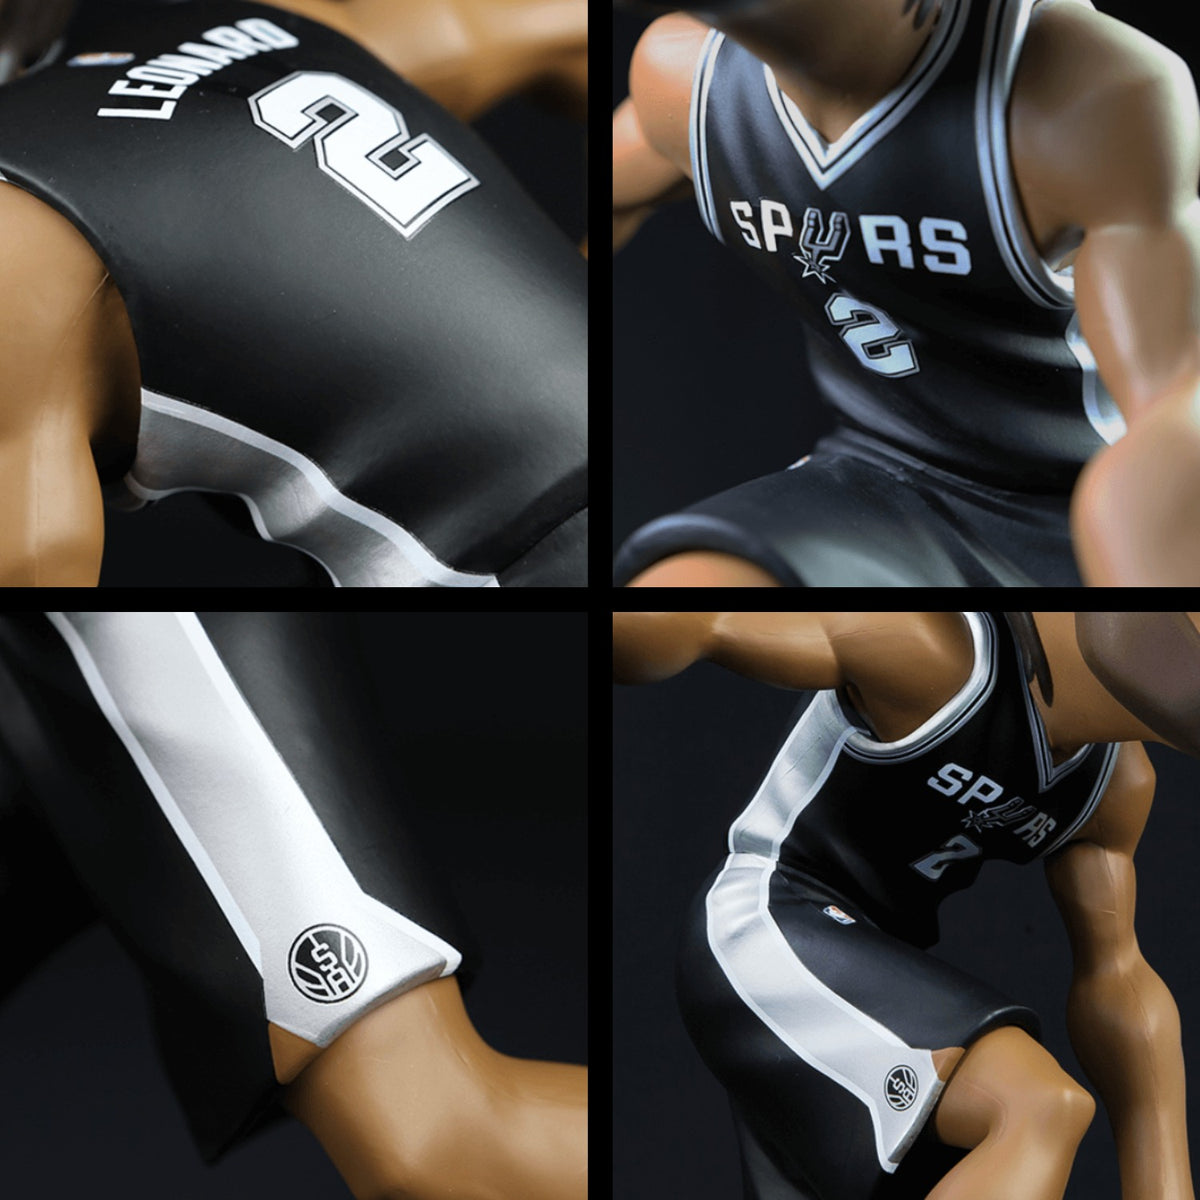 SMALL-STARS KAWHI LEONARD (CLIPPERS 2019-20 BLUE JERSEY – Collectors Outlet  llc